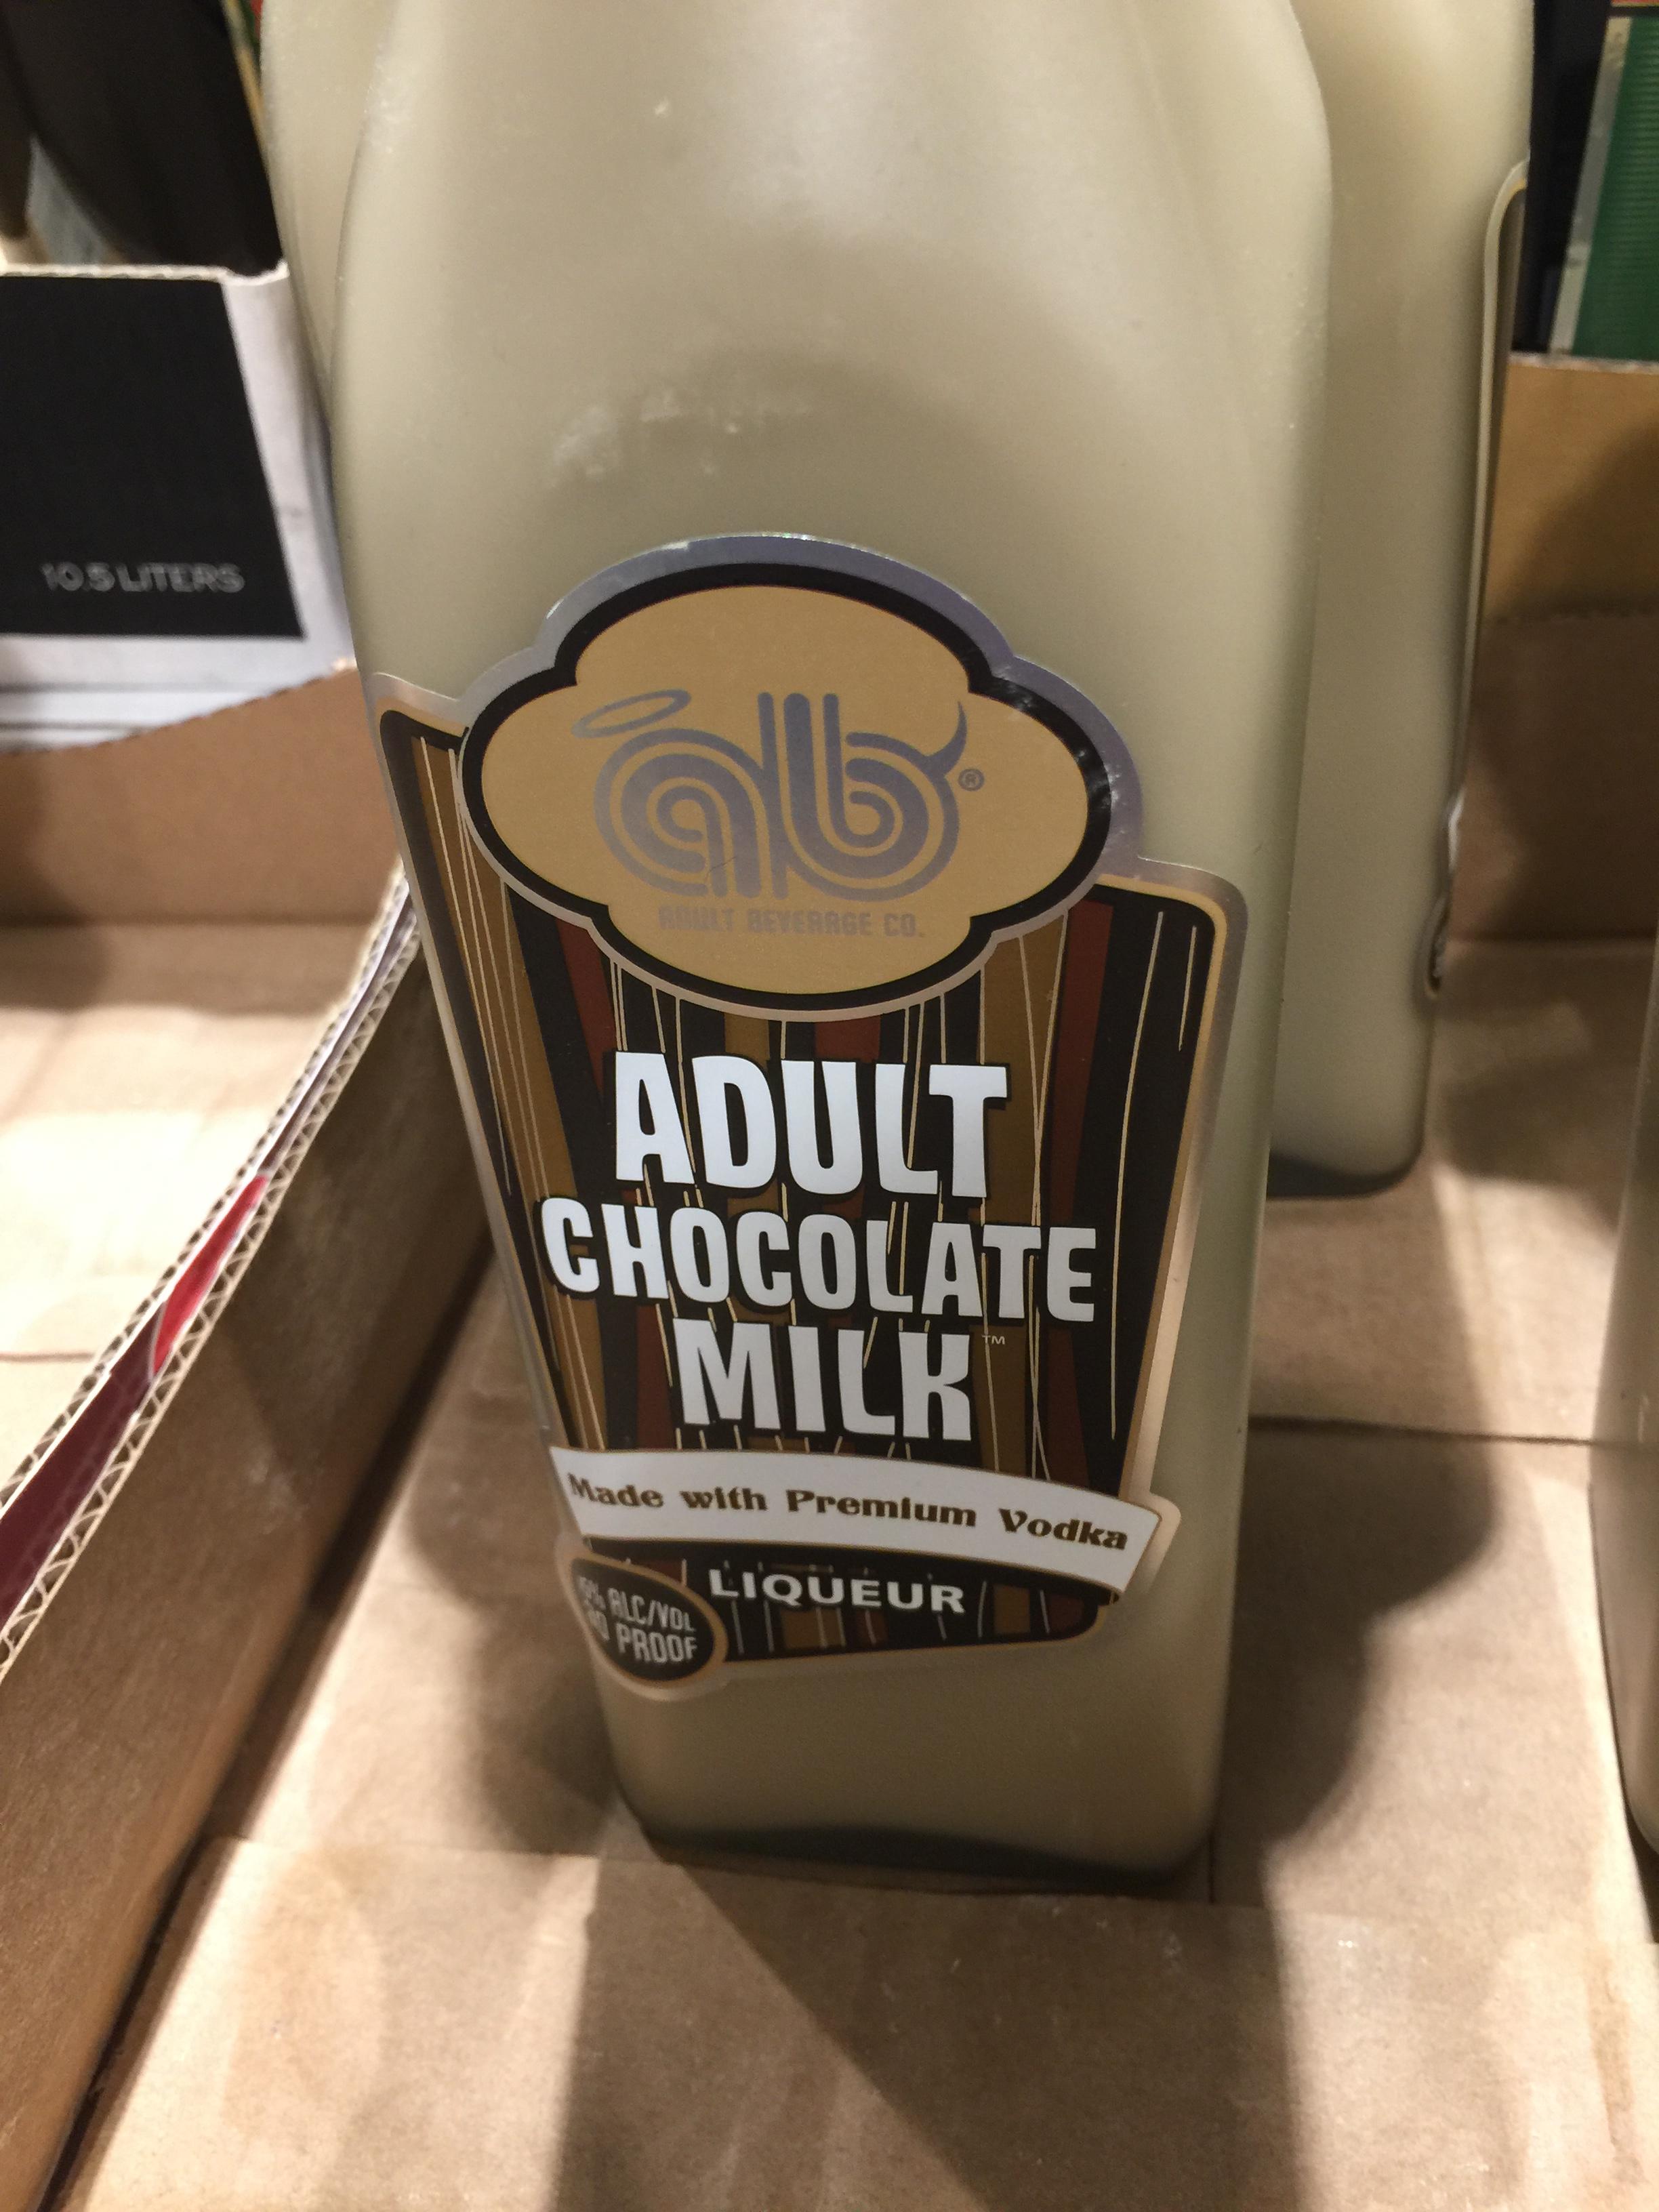 Adult Chocolate milk with vodka in it.